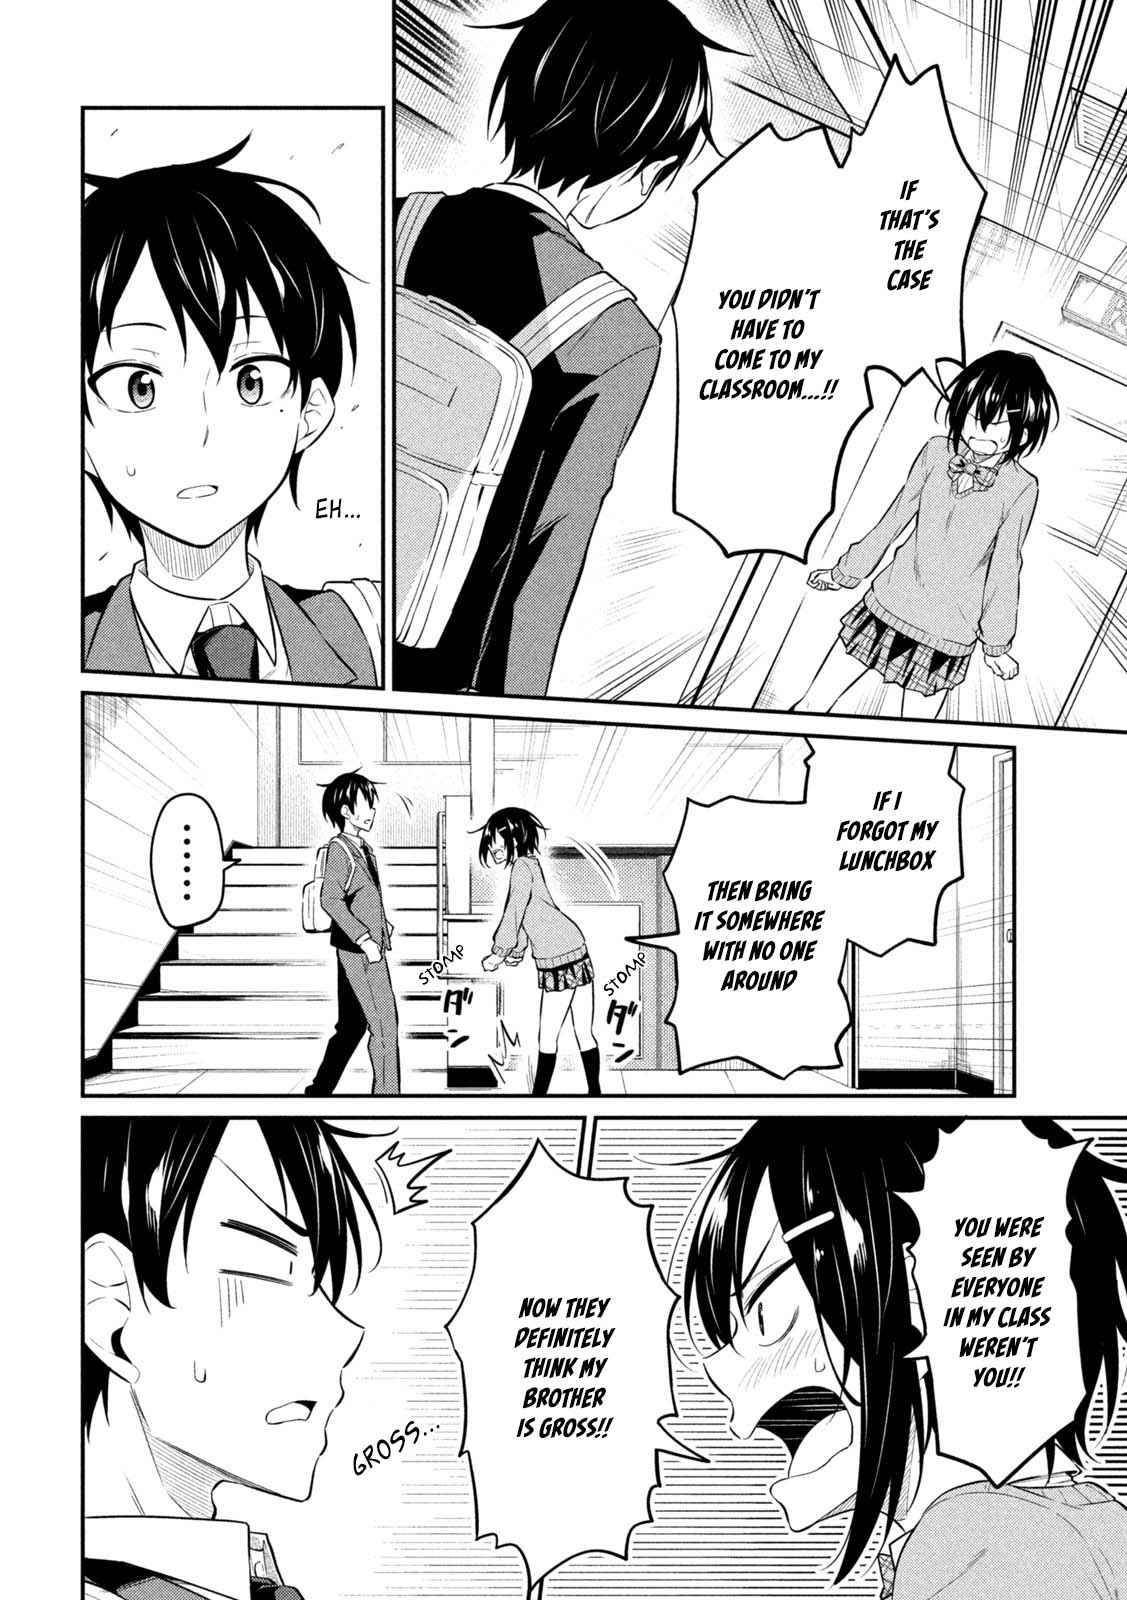 Home Cabaret ~Operation: Making A Cabaret Club At Home So Nii-Chan Can Get Used To Girls~ - chapter 3 - #5